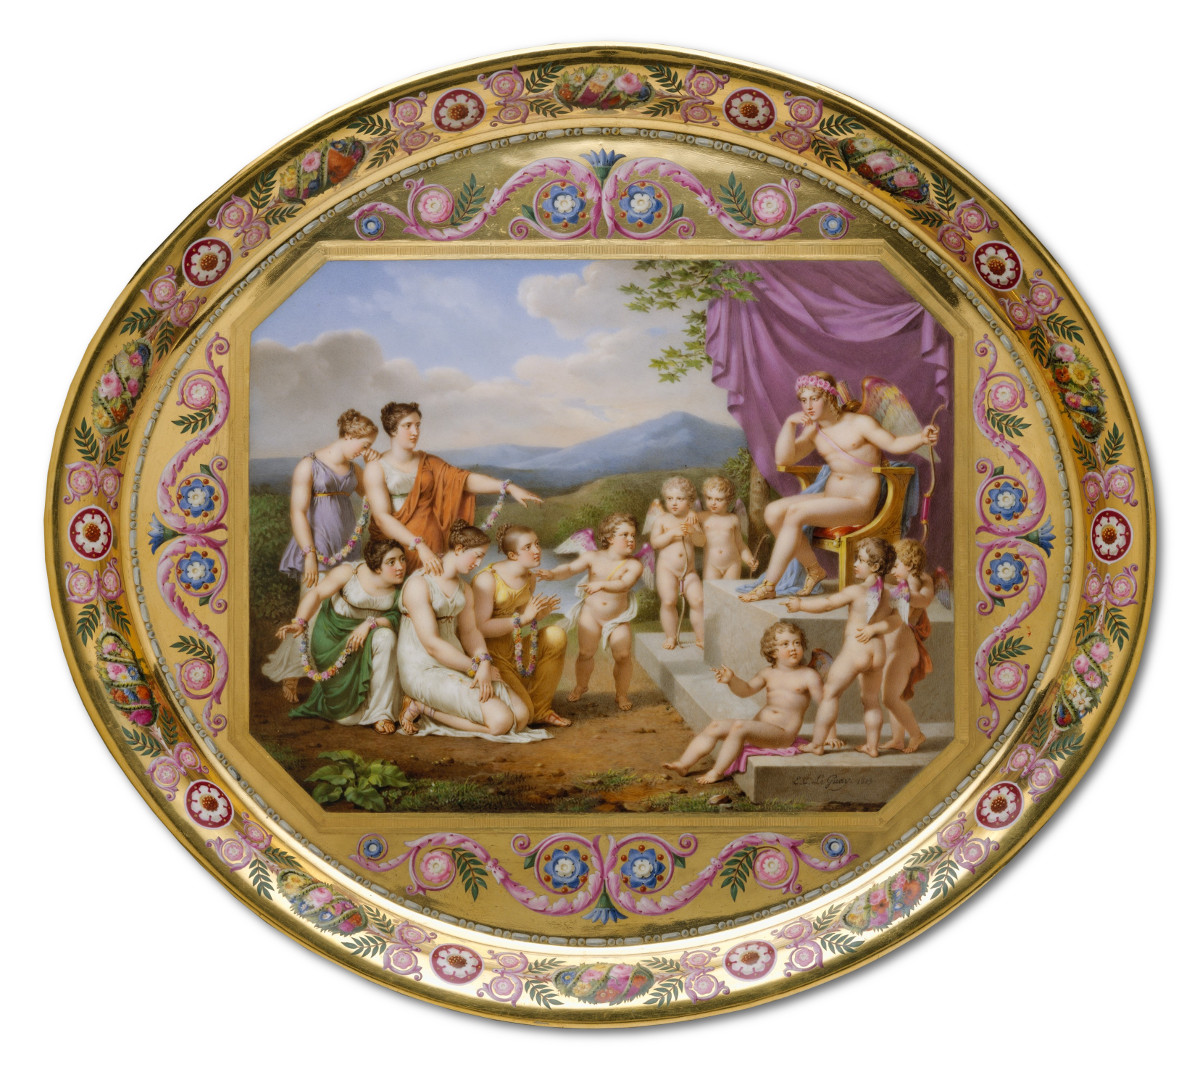 1813 Breakfast Service tray. Sèvres Manufactory. metmuseum